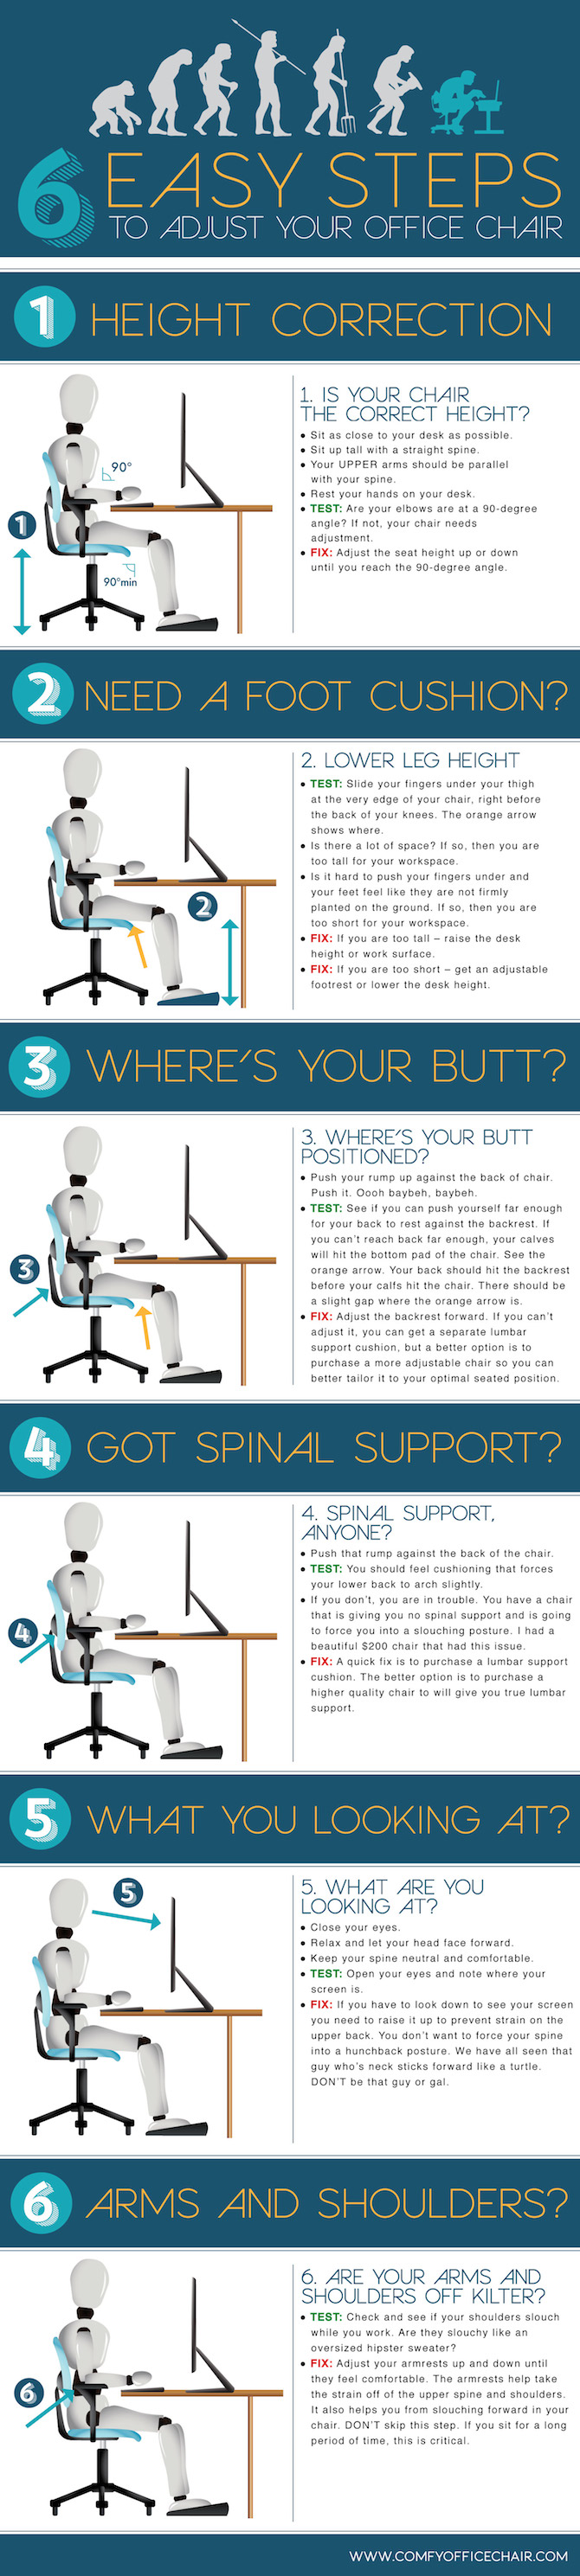 How to sit at your desk